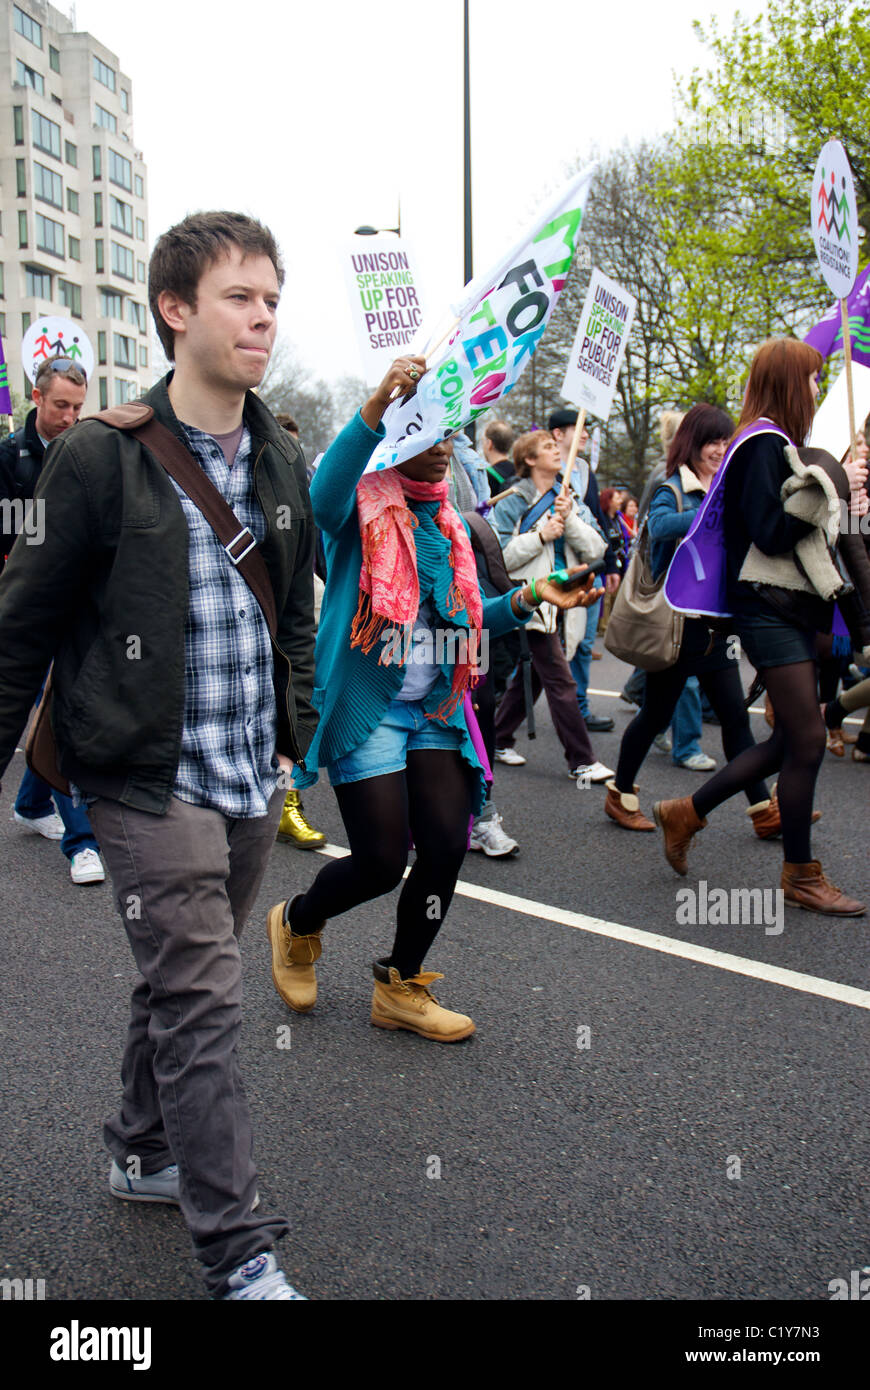 Protester marching at March for the Alternative rally organised by the TUC, London, England Stock Photo